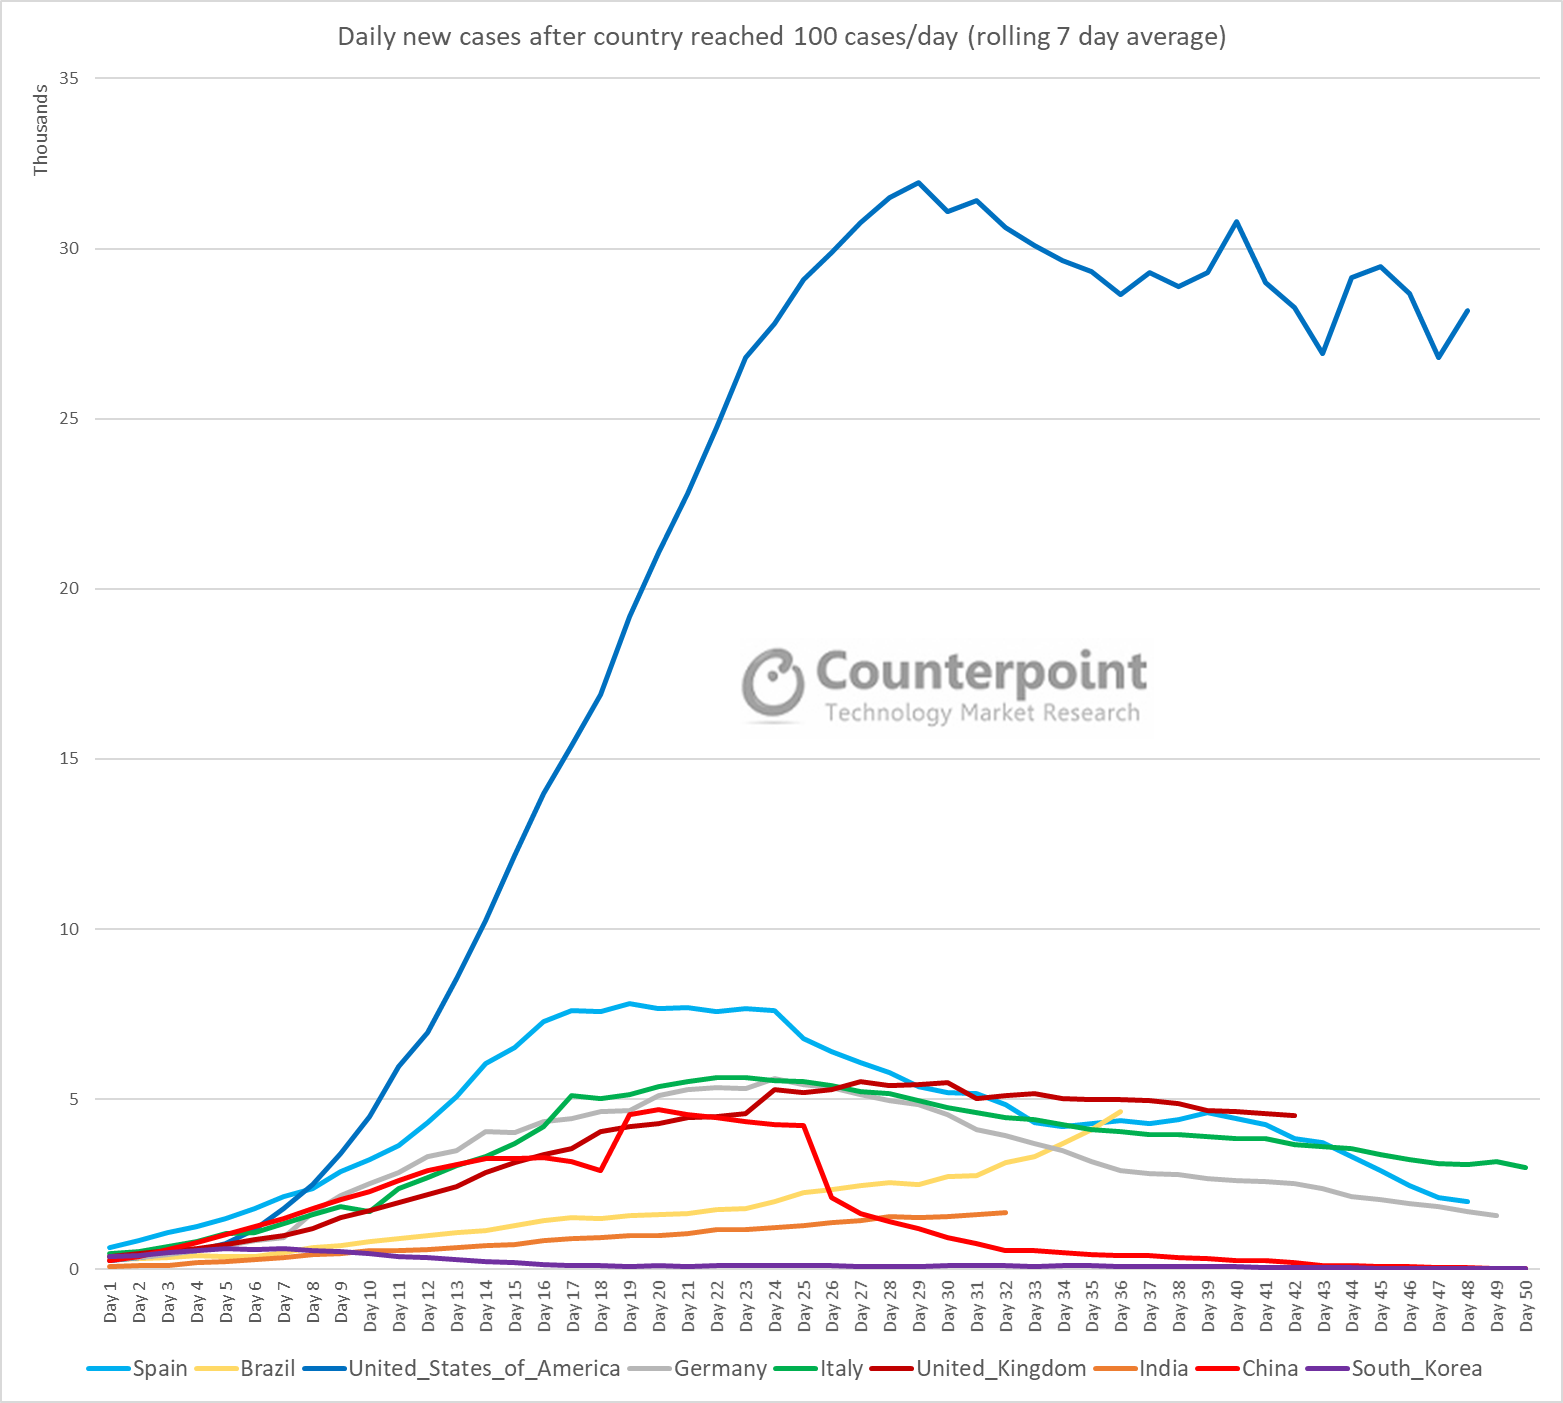 Counterpoint Daily New Cases After Country Reached 100 Cases Per Day - Week 18 Update